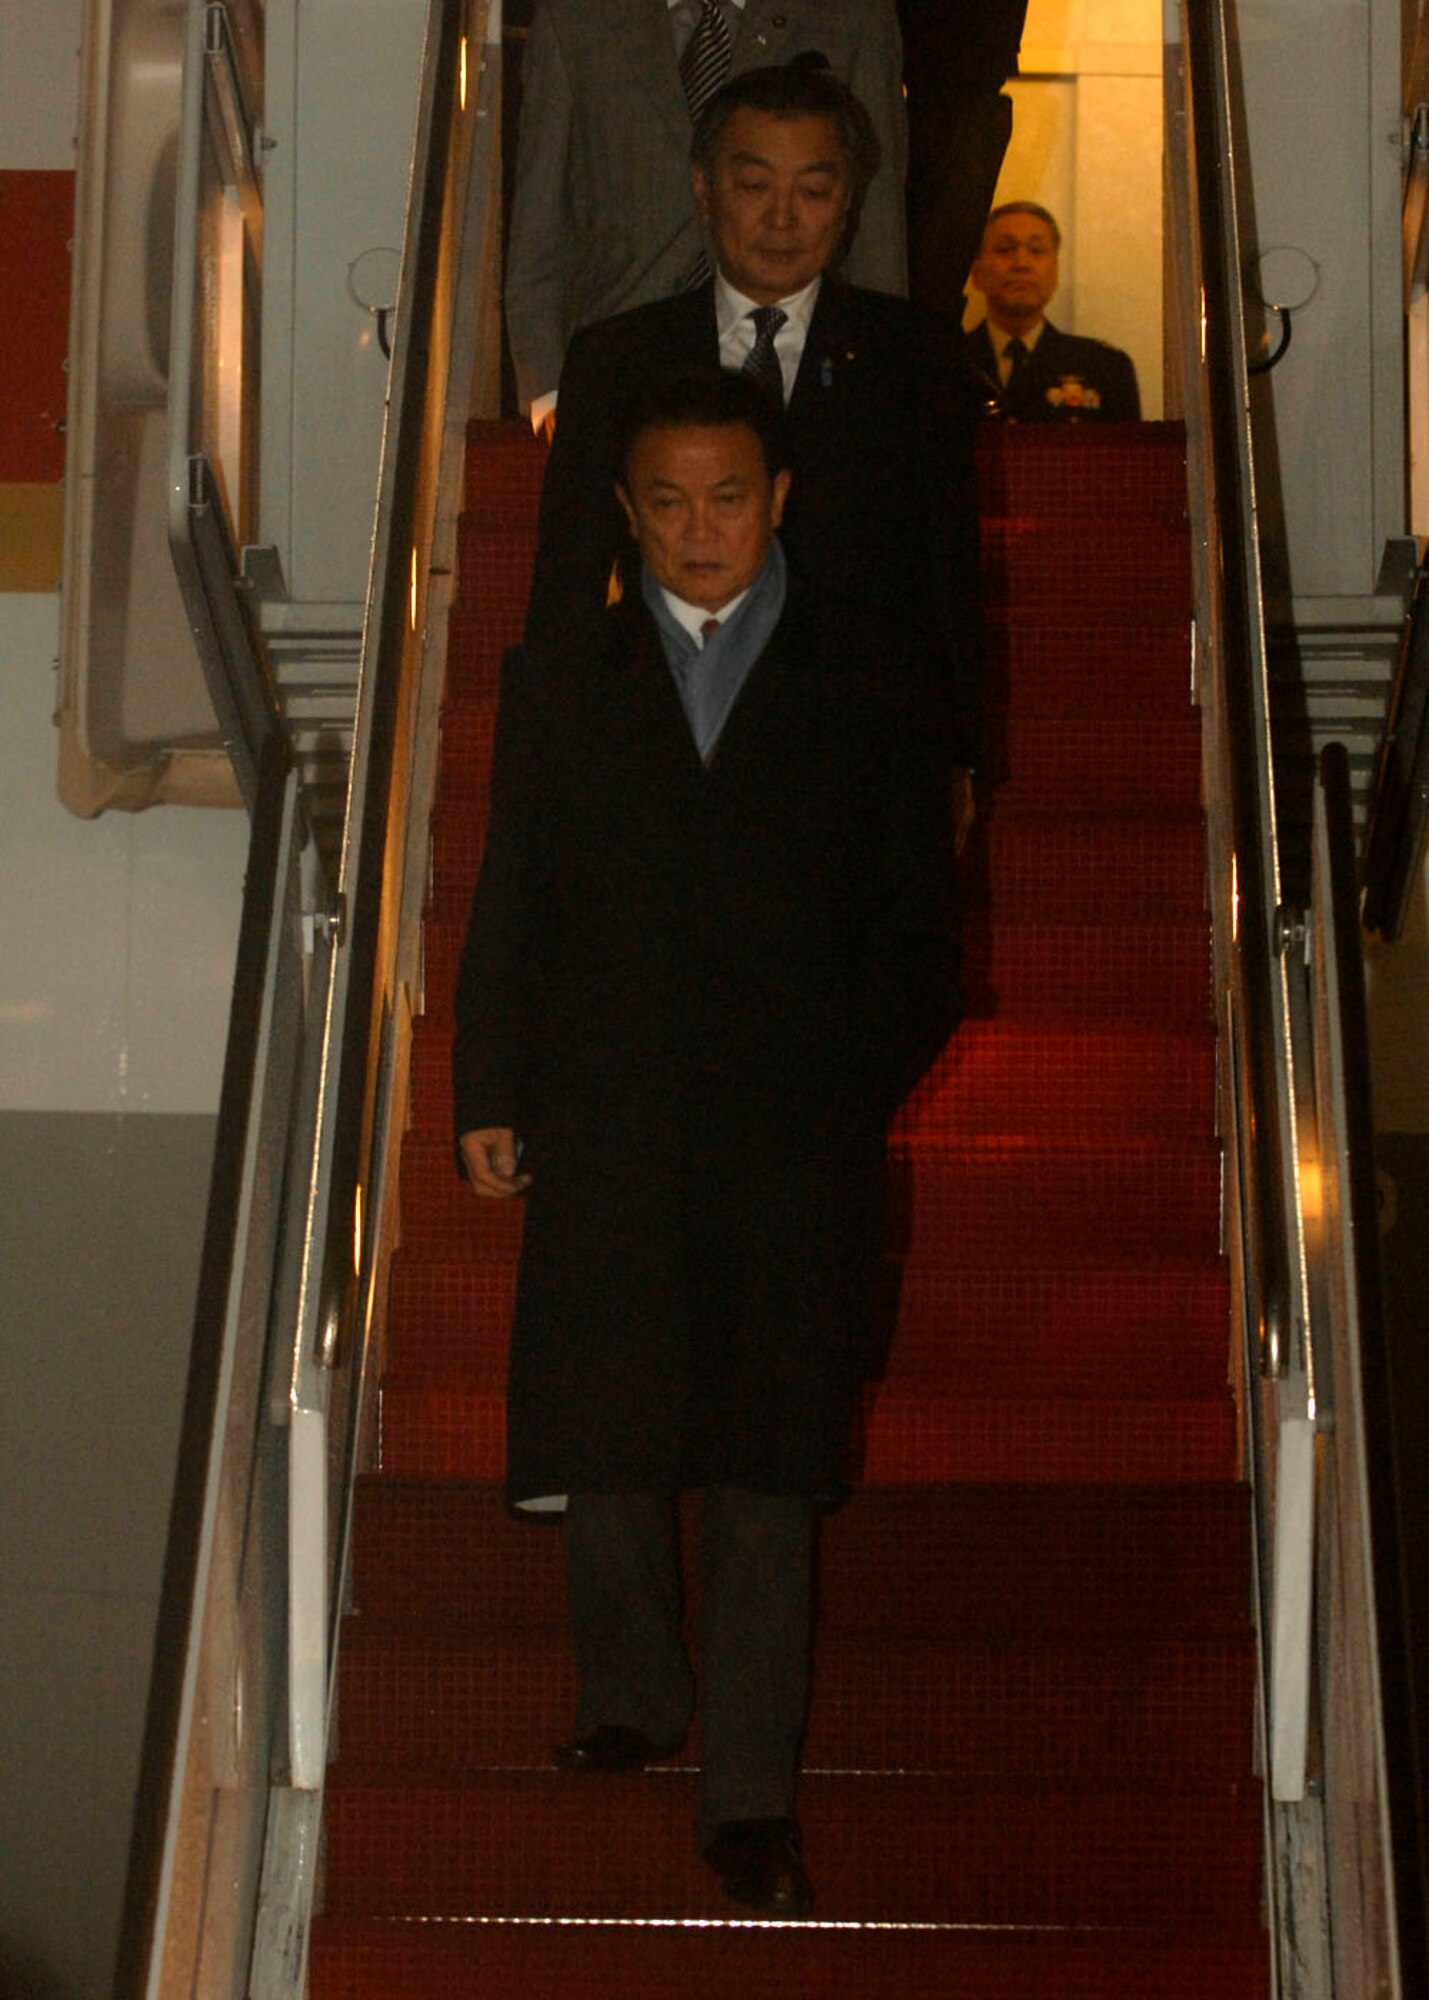 Japanese Prime Minister Taro Aso lands at Andrews Air Force Base, Md., Nov.13, 2008, for the two-day G20 Summit at the White House in Washington.  The summit, hosted by U.S. President George W. Bush, will bring together world leaders to discuss the increasing global financial crisis, its causes and efforts to resolve it. (U.S. Air Force photo by Senior Airman Melissa Stonecipher)